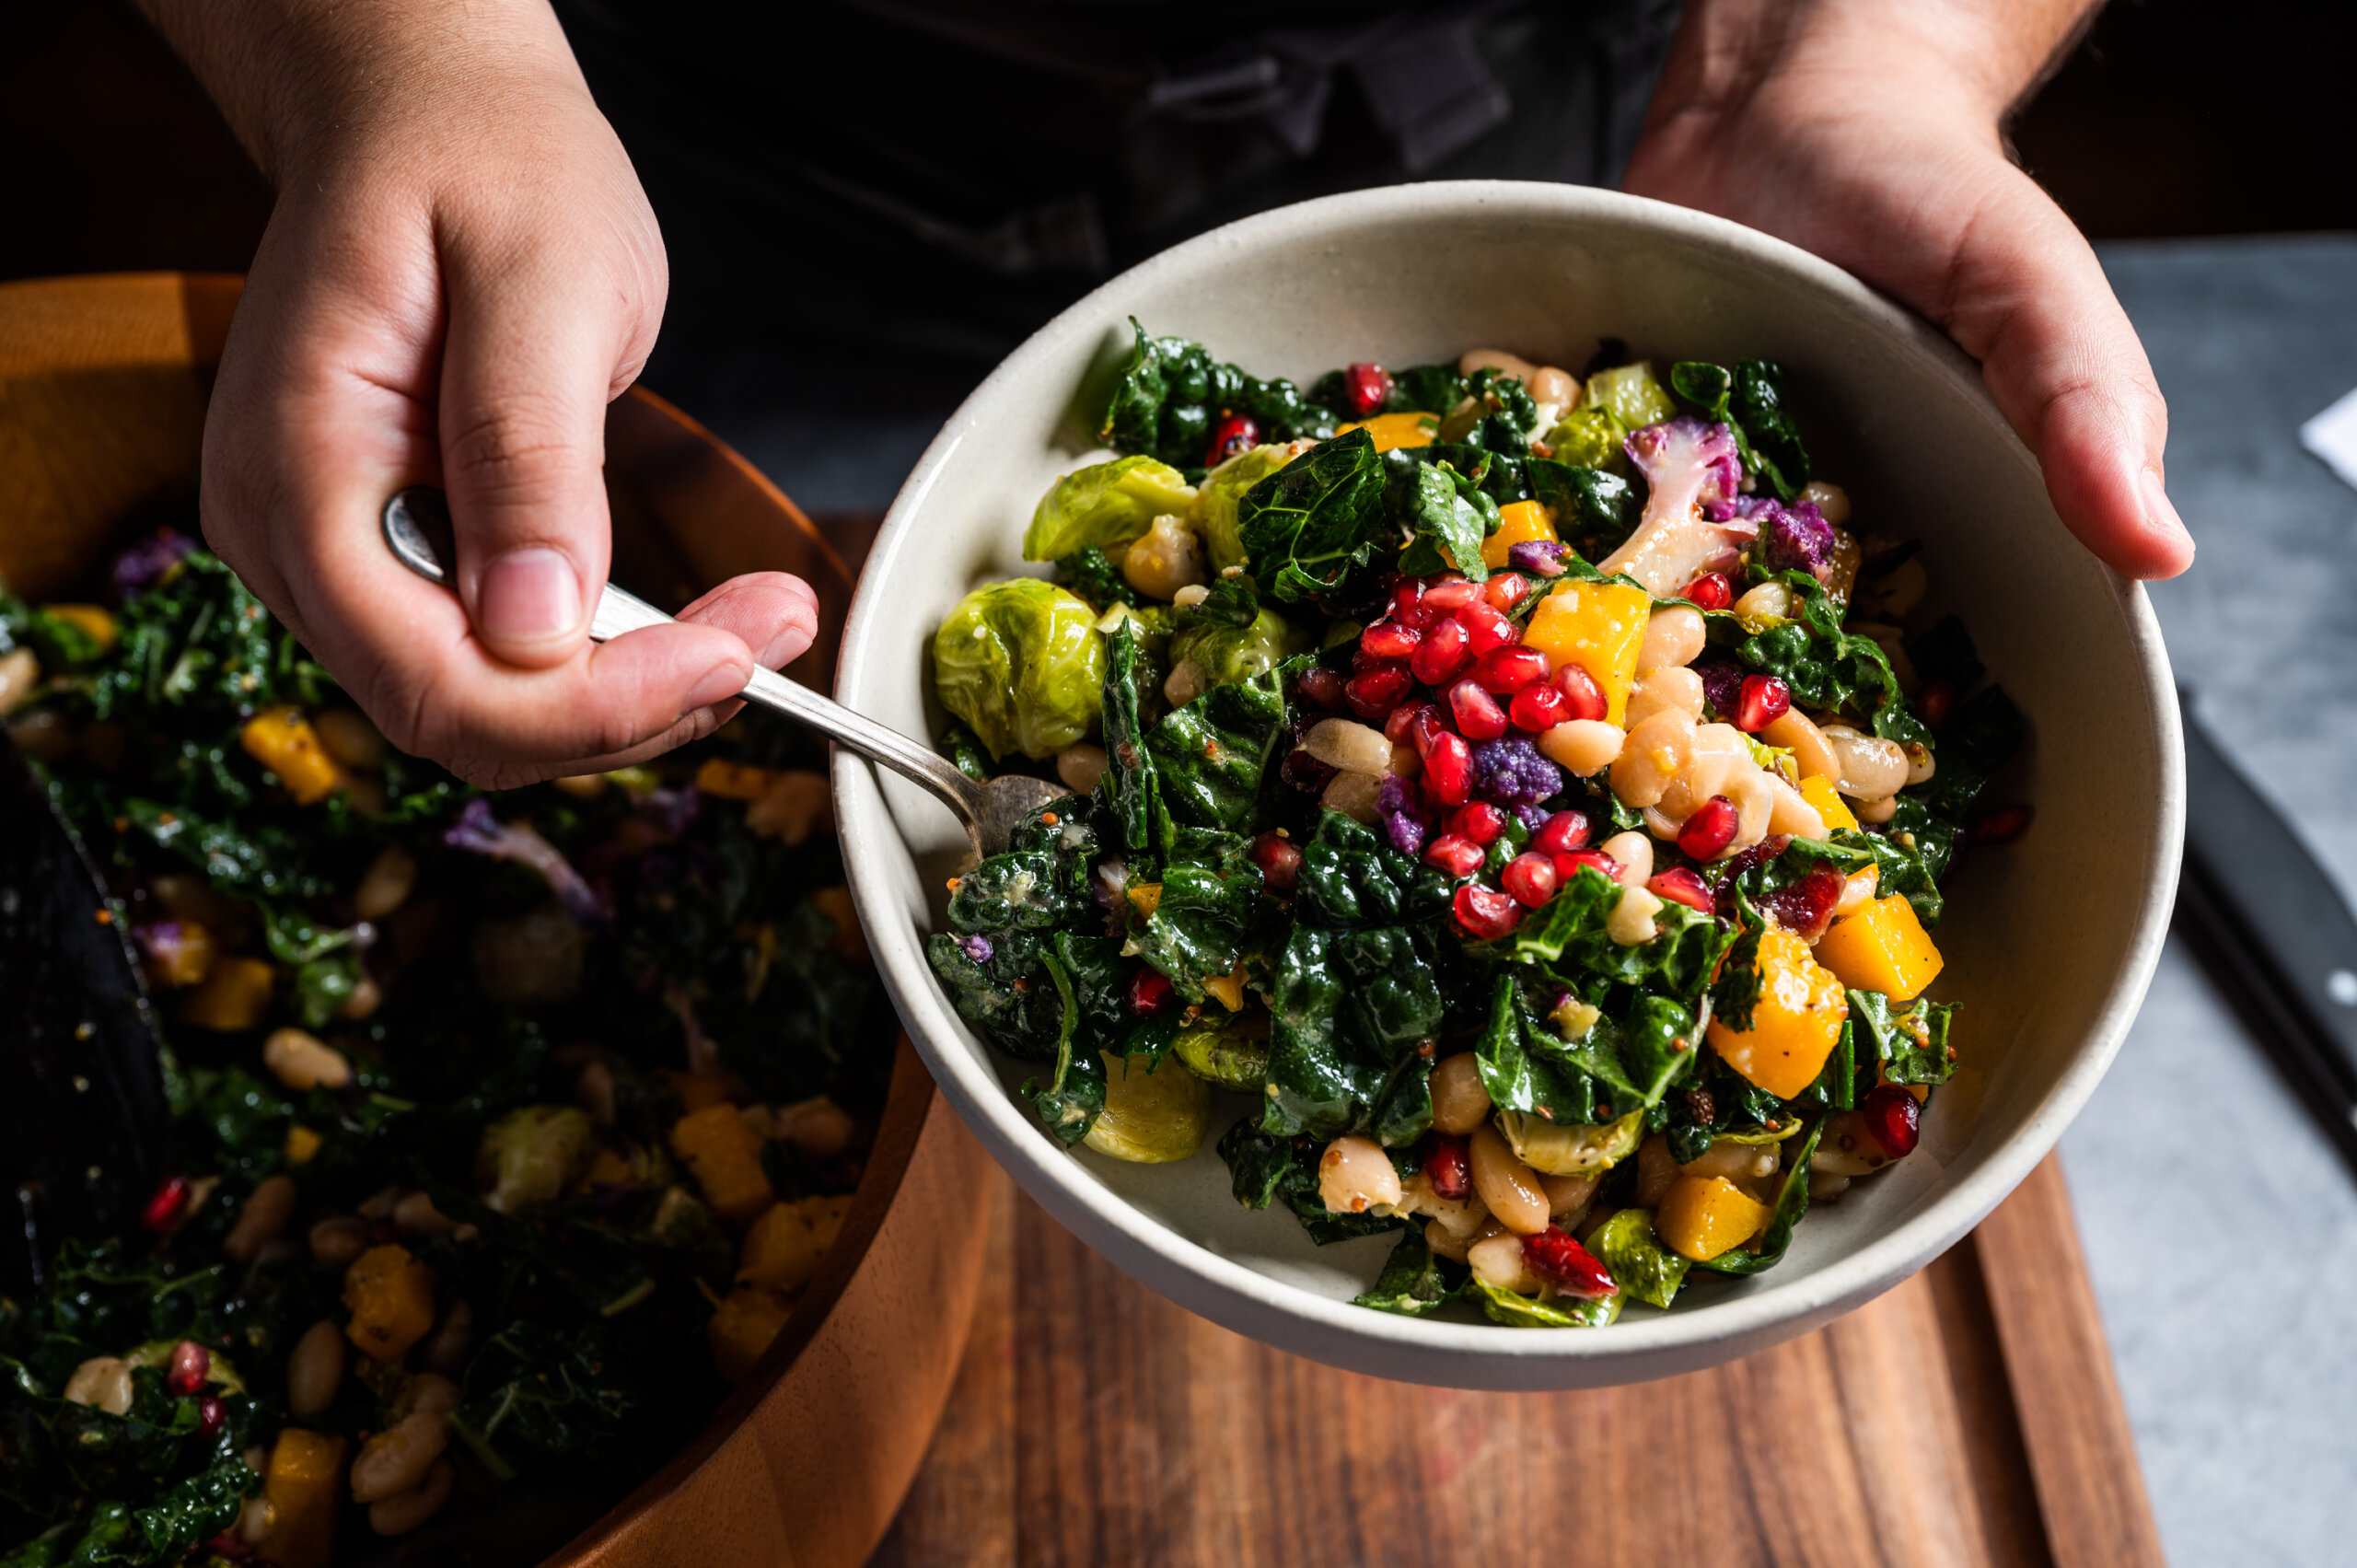 Harvest salad bowl with white beans, roasted vegetables, and pomegranate arils